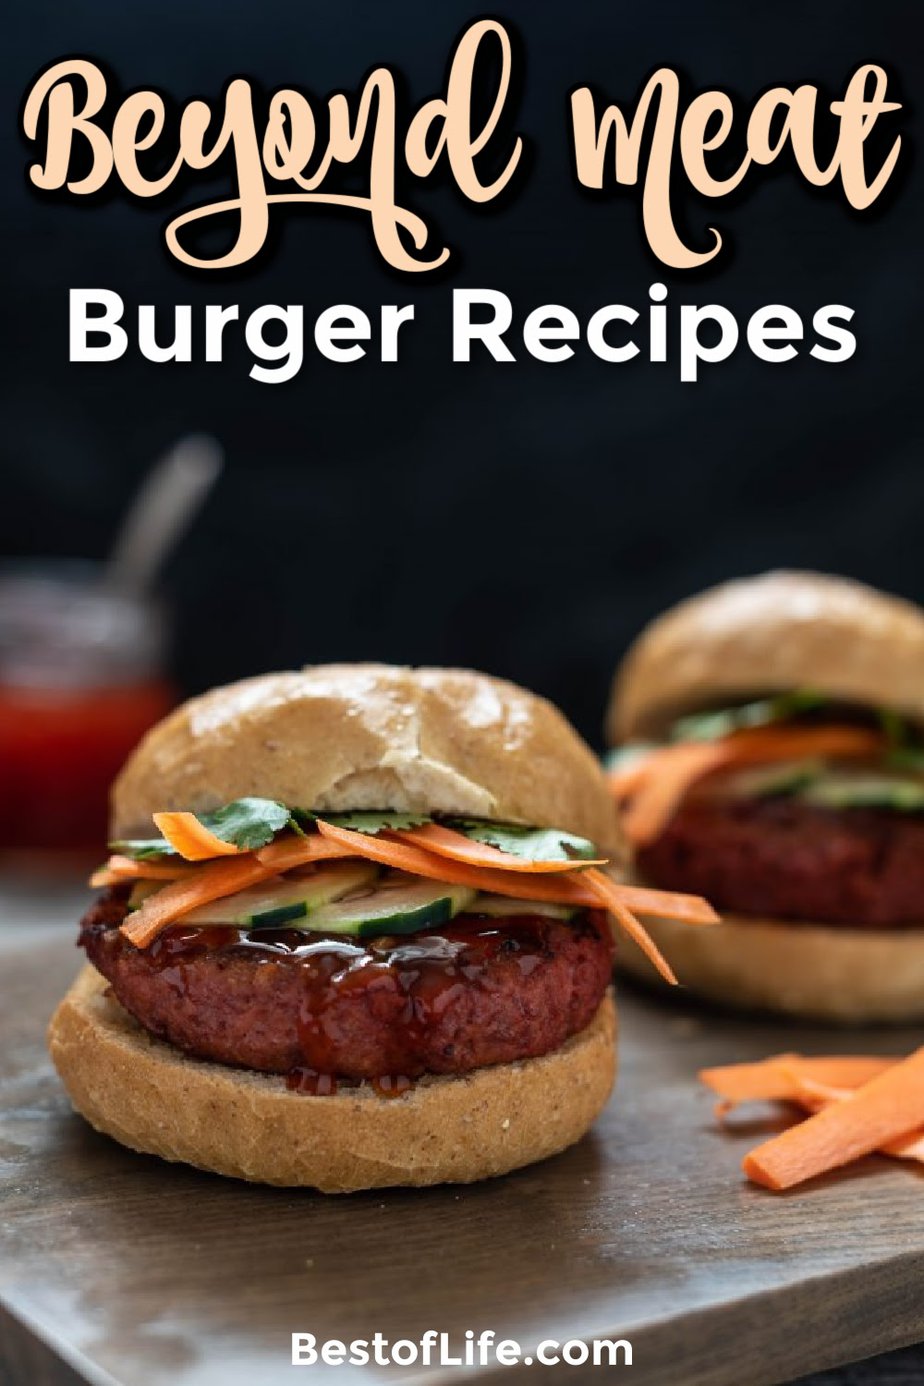 Beyond Meat Burger Recipes | Food fads come and go! Beyond Meat burger recipes are one of the latest trends. Try one of these recipes and let us know what you think! Beyond Meat Recipes | Beyond Meat Burger Copy Cat Recipes | Dinner Recipes | Recipes for the Grill | Vegan Burger Recipes | Vegetarian Burger Recipes | Healthy Burger Recipes | Recipes with Beyond Meat | Healthy Summer Recipes #beyondmeat #veganrecipes